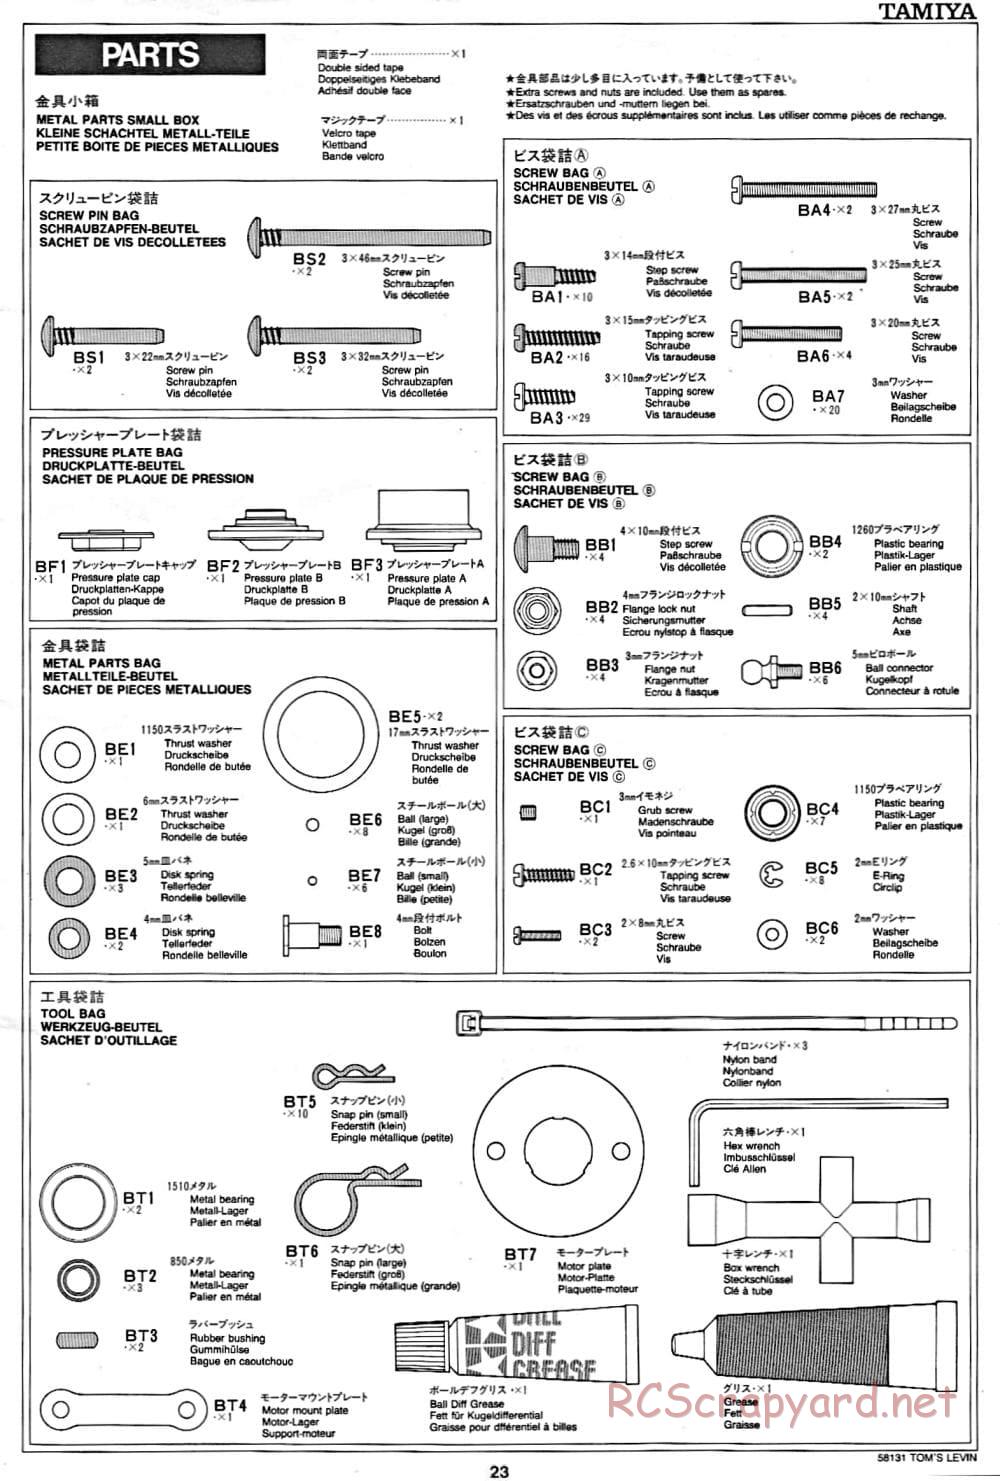 Tamiya - Toyota Tom's Levin - FF-01 Chassis - Manual - Page 23